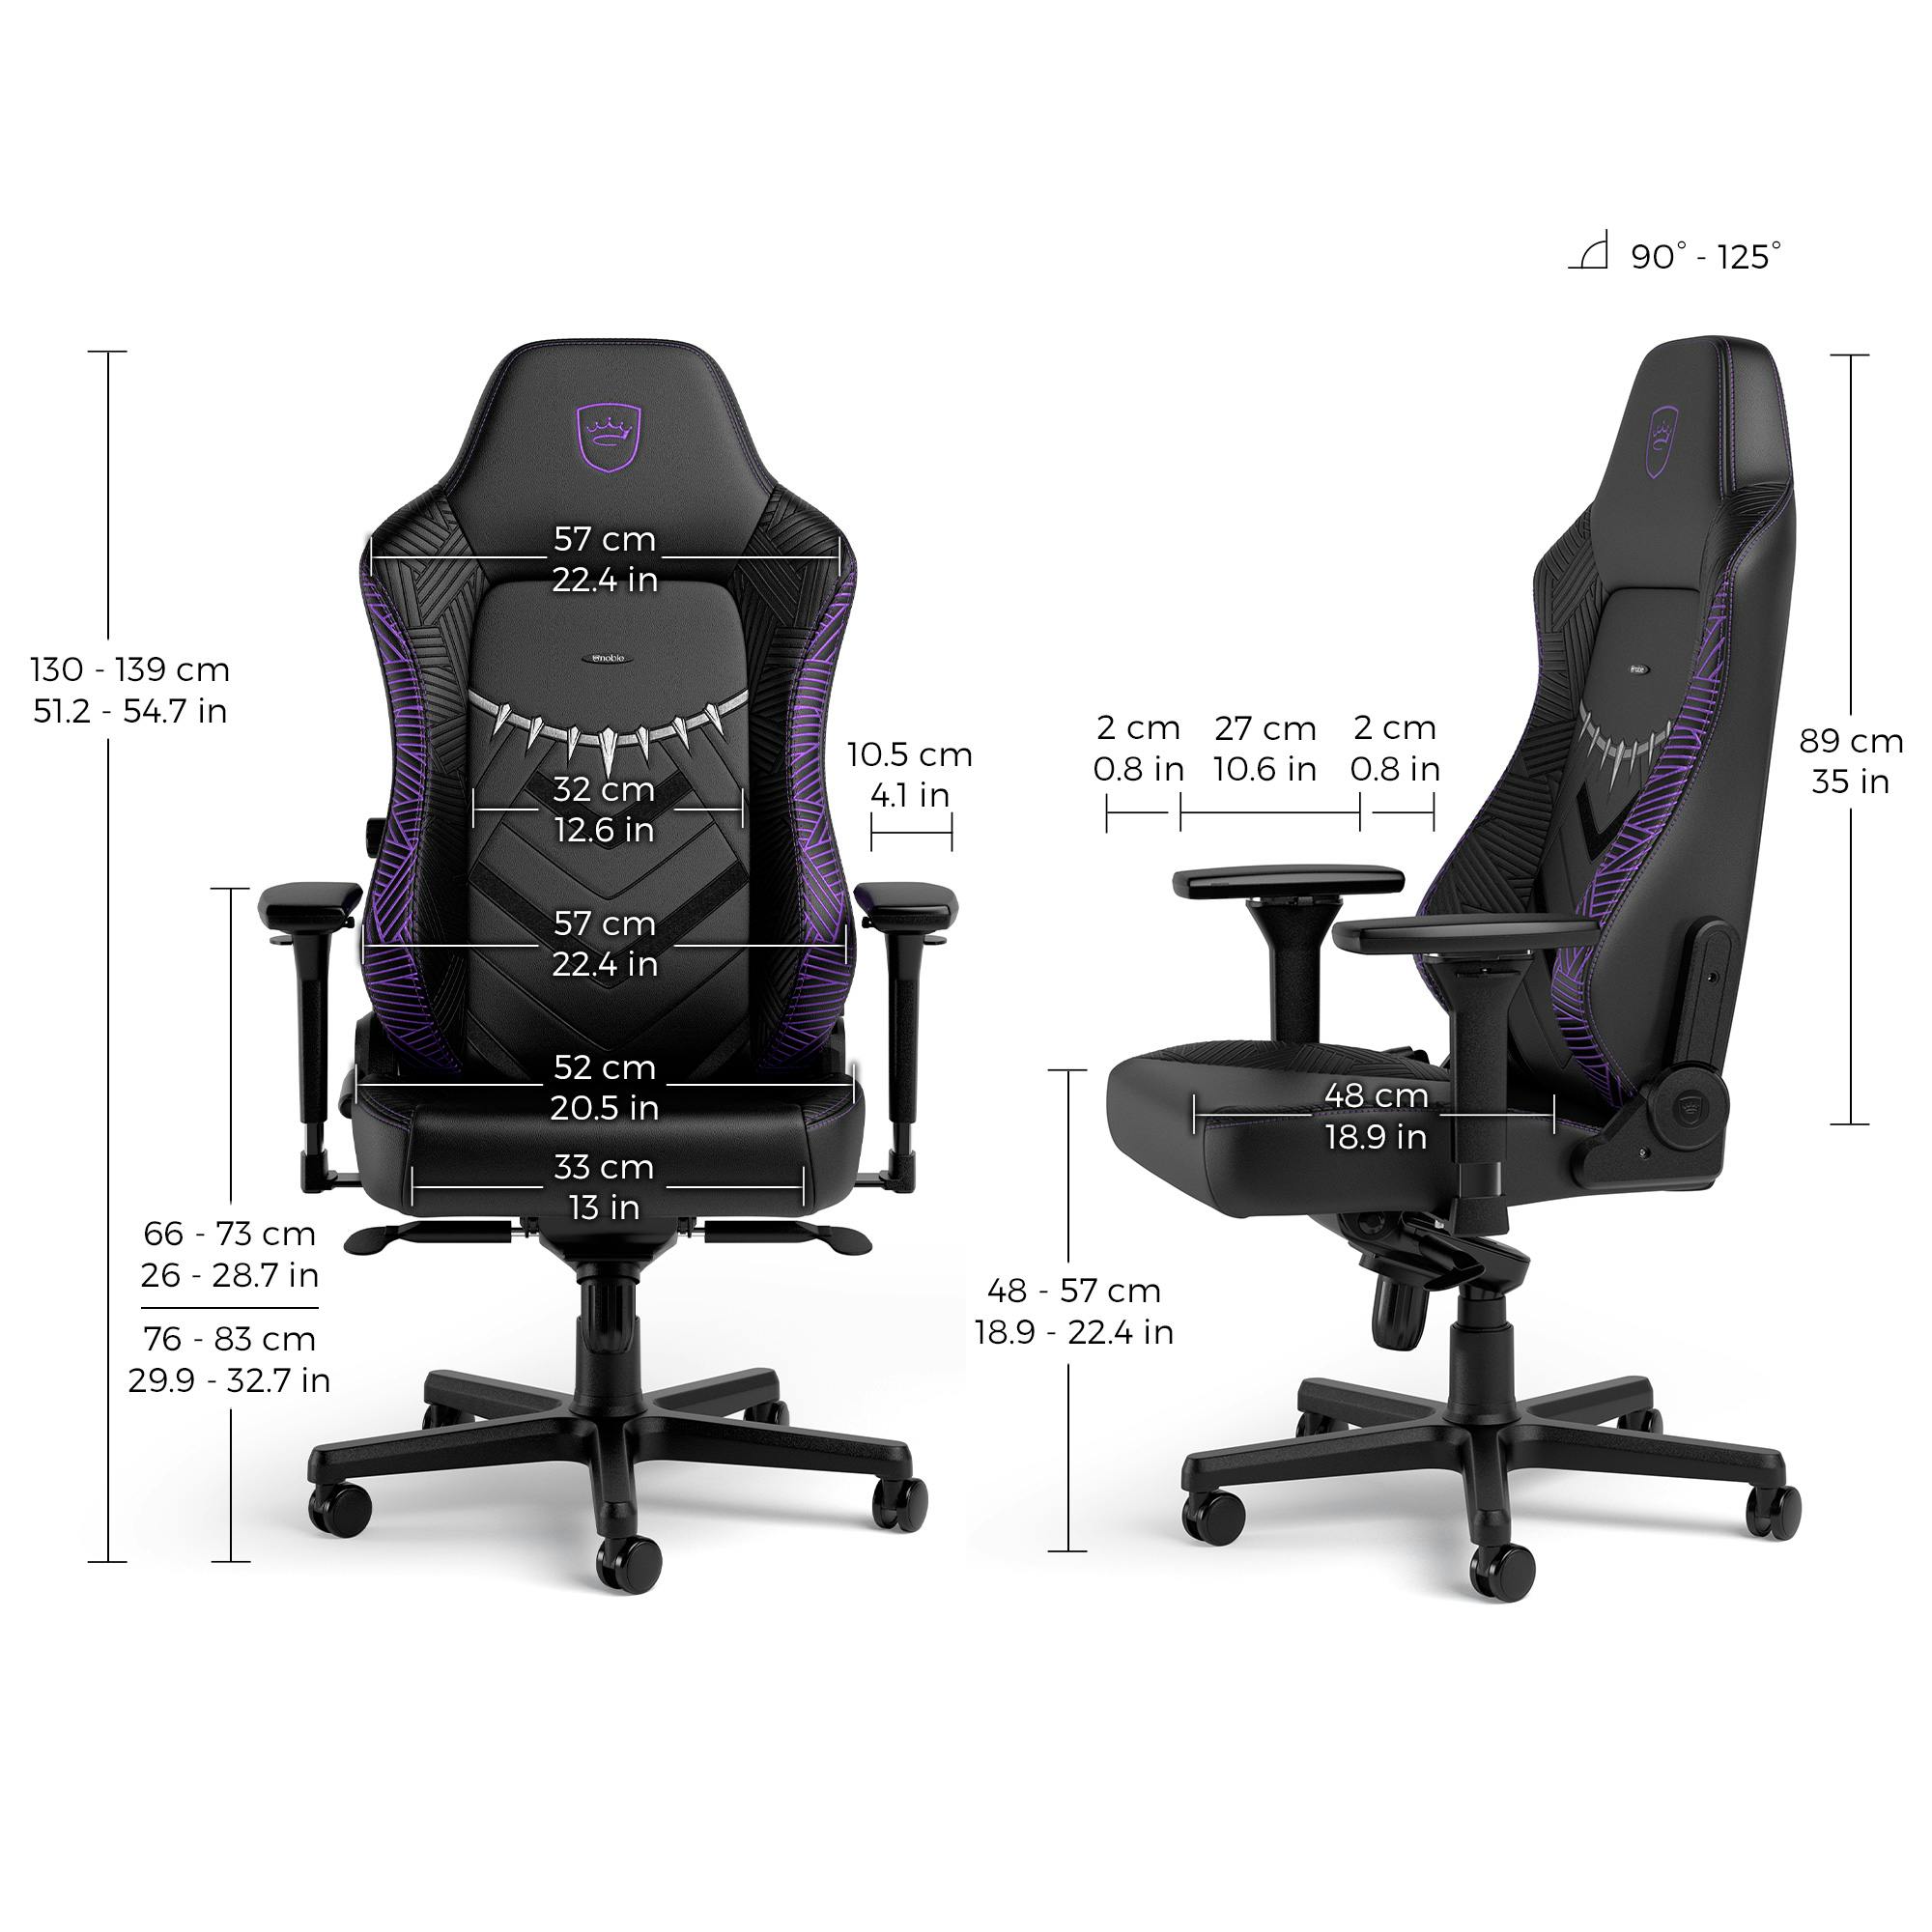 gaming chair Black Panther data specifications measurements